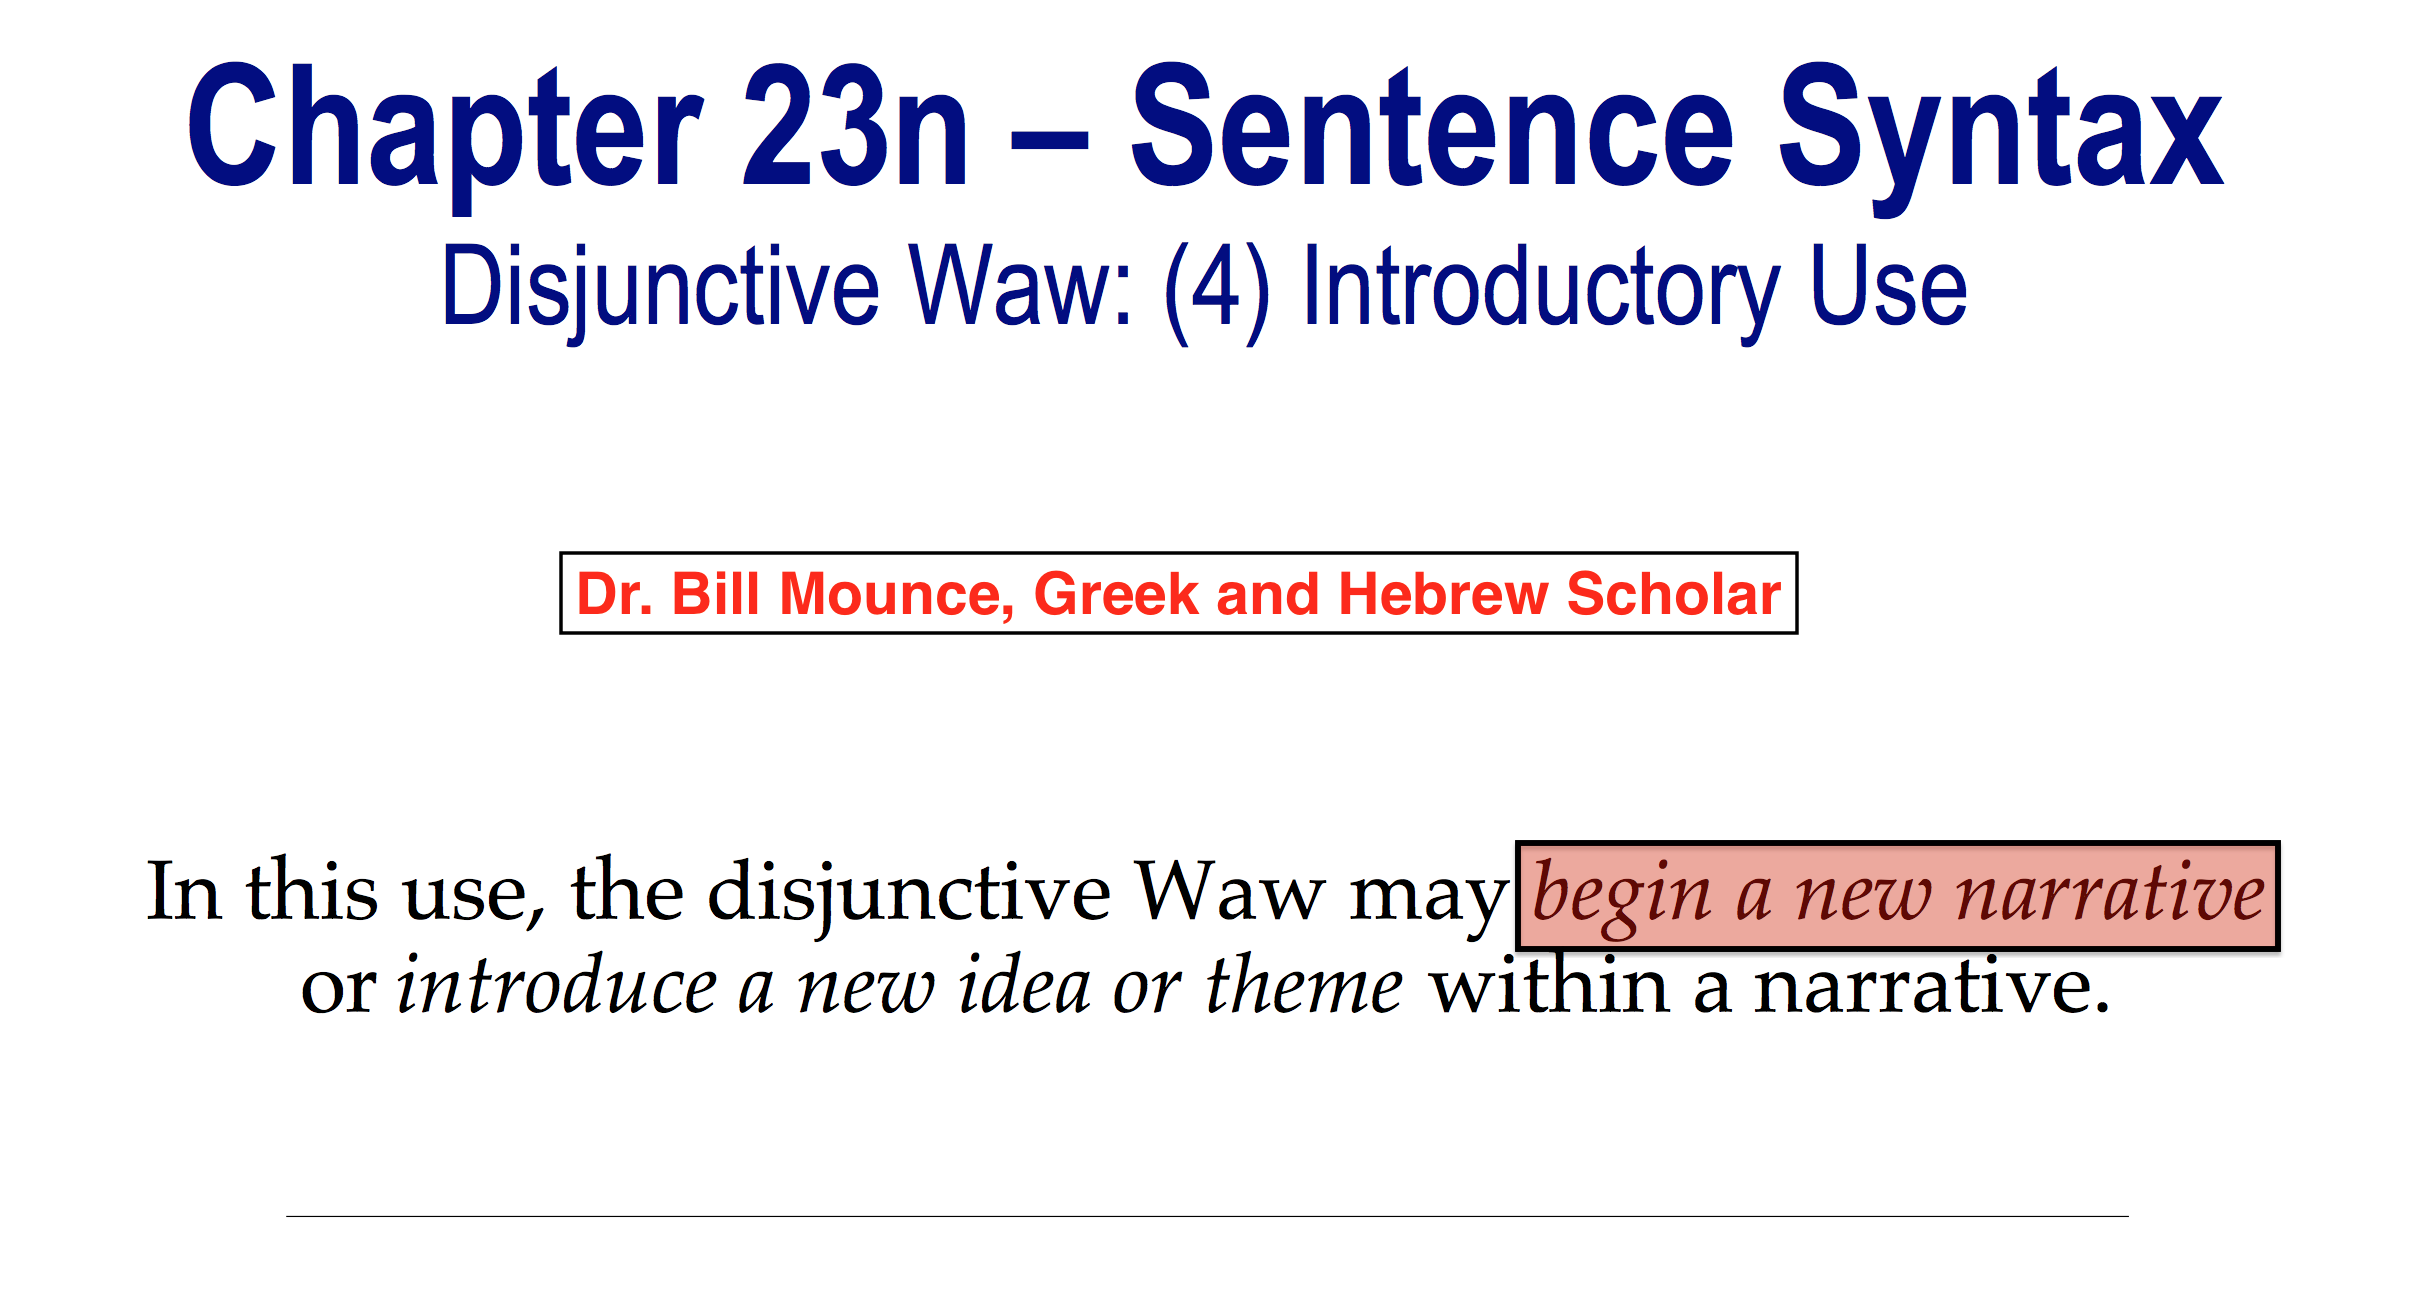 mounce-waw-disjunctive-introductory.png